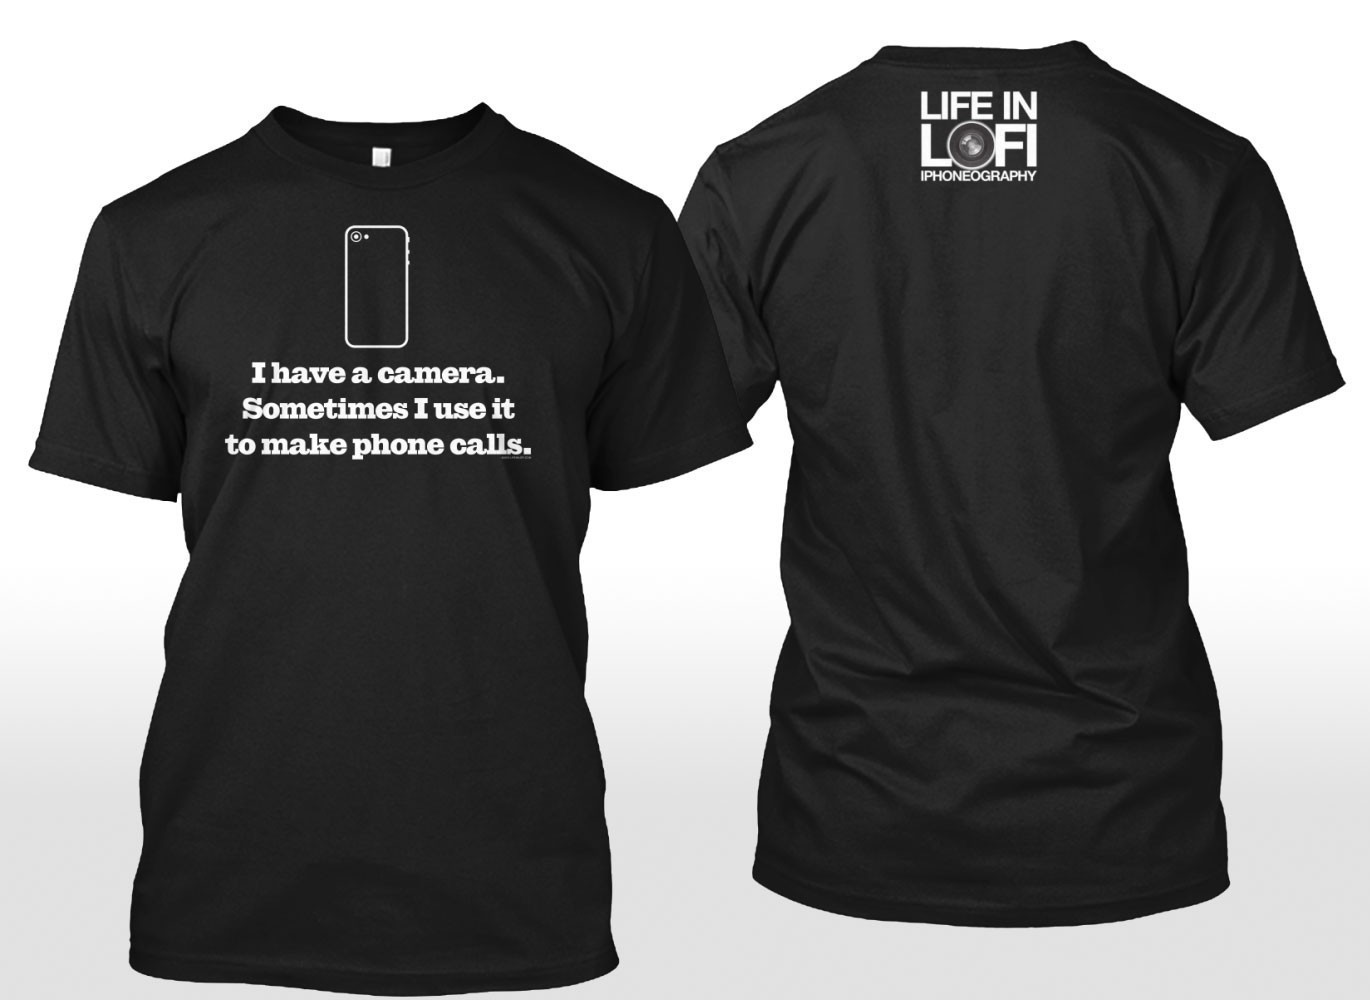 Life In LoFi “I Have a Camera” T-Shirts available now thru Nov 19!